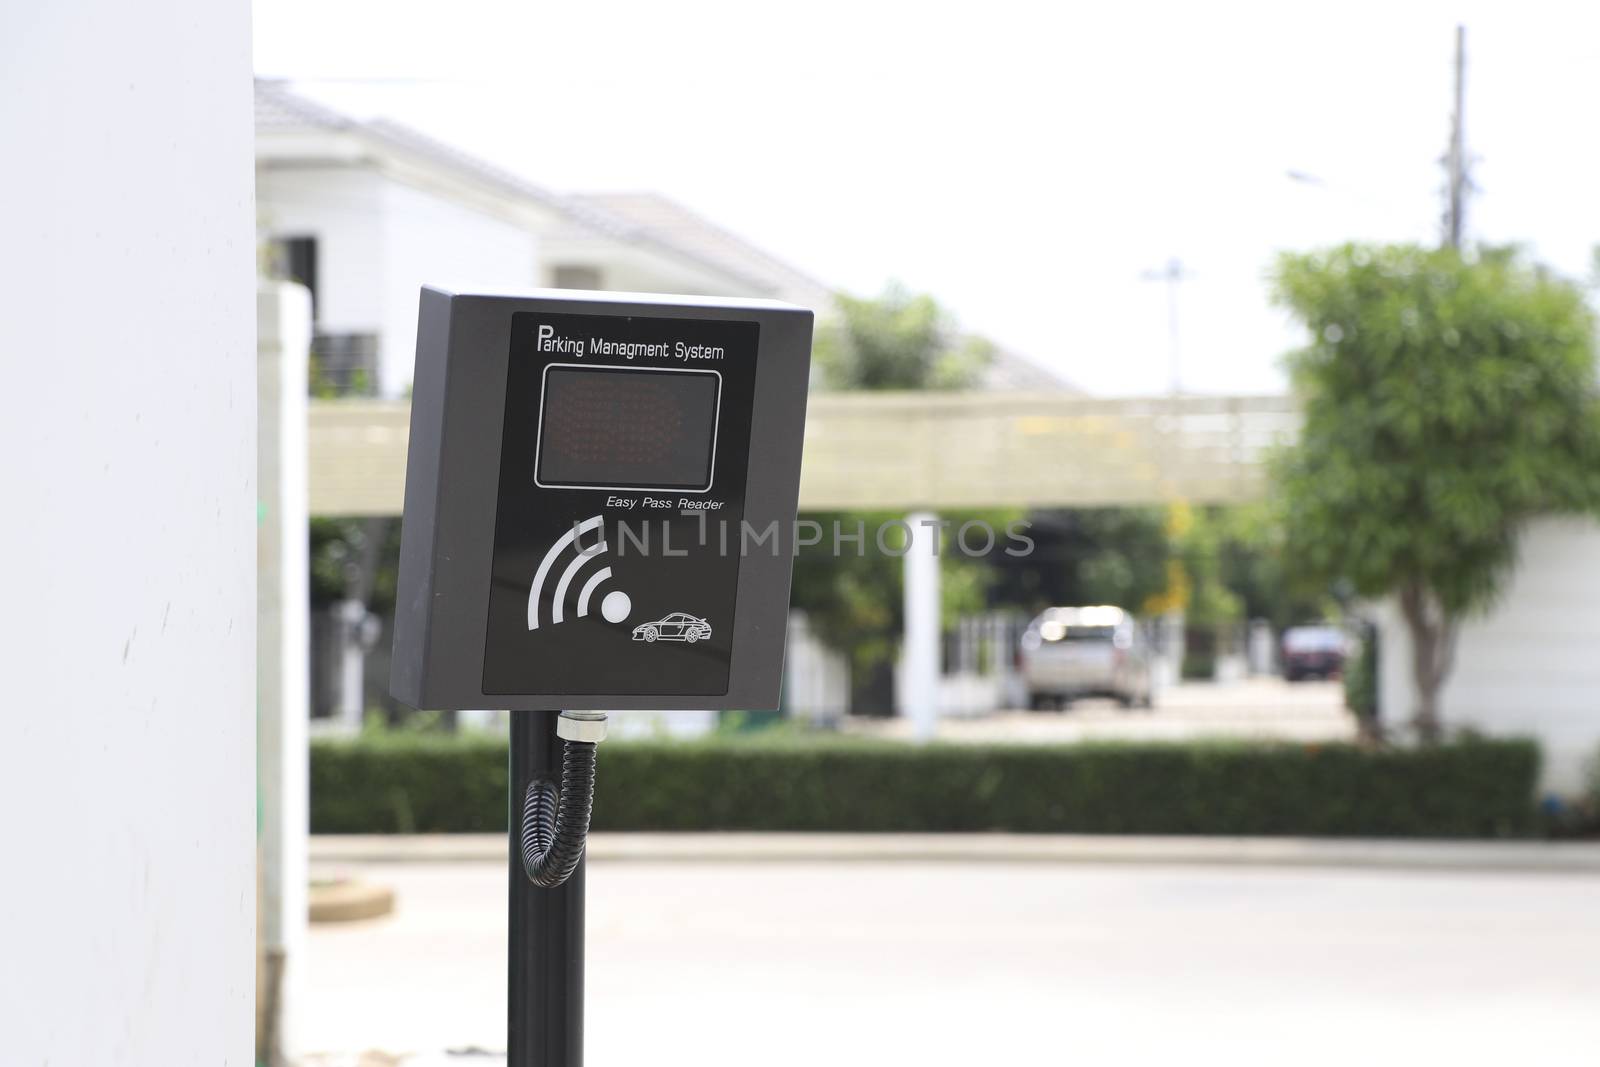 Access control of vehicles for entry and exit for safety and privacy. Automatic sensor system for entry and exit.